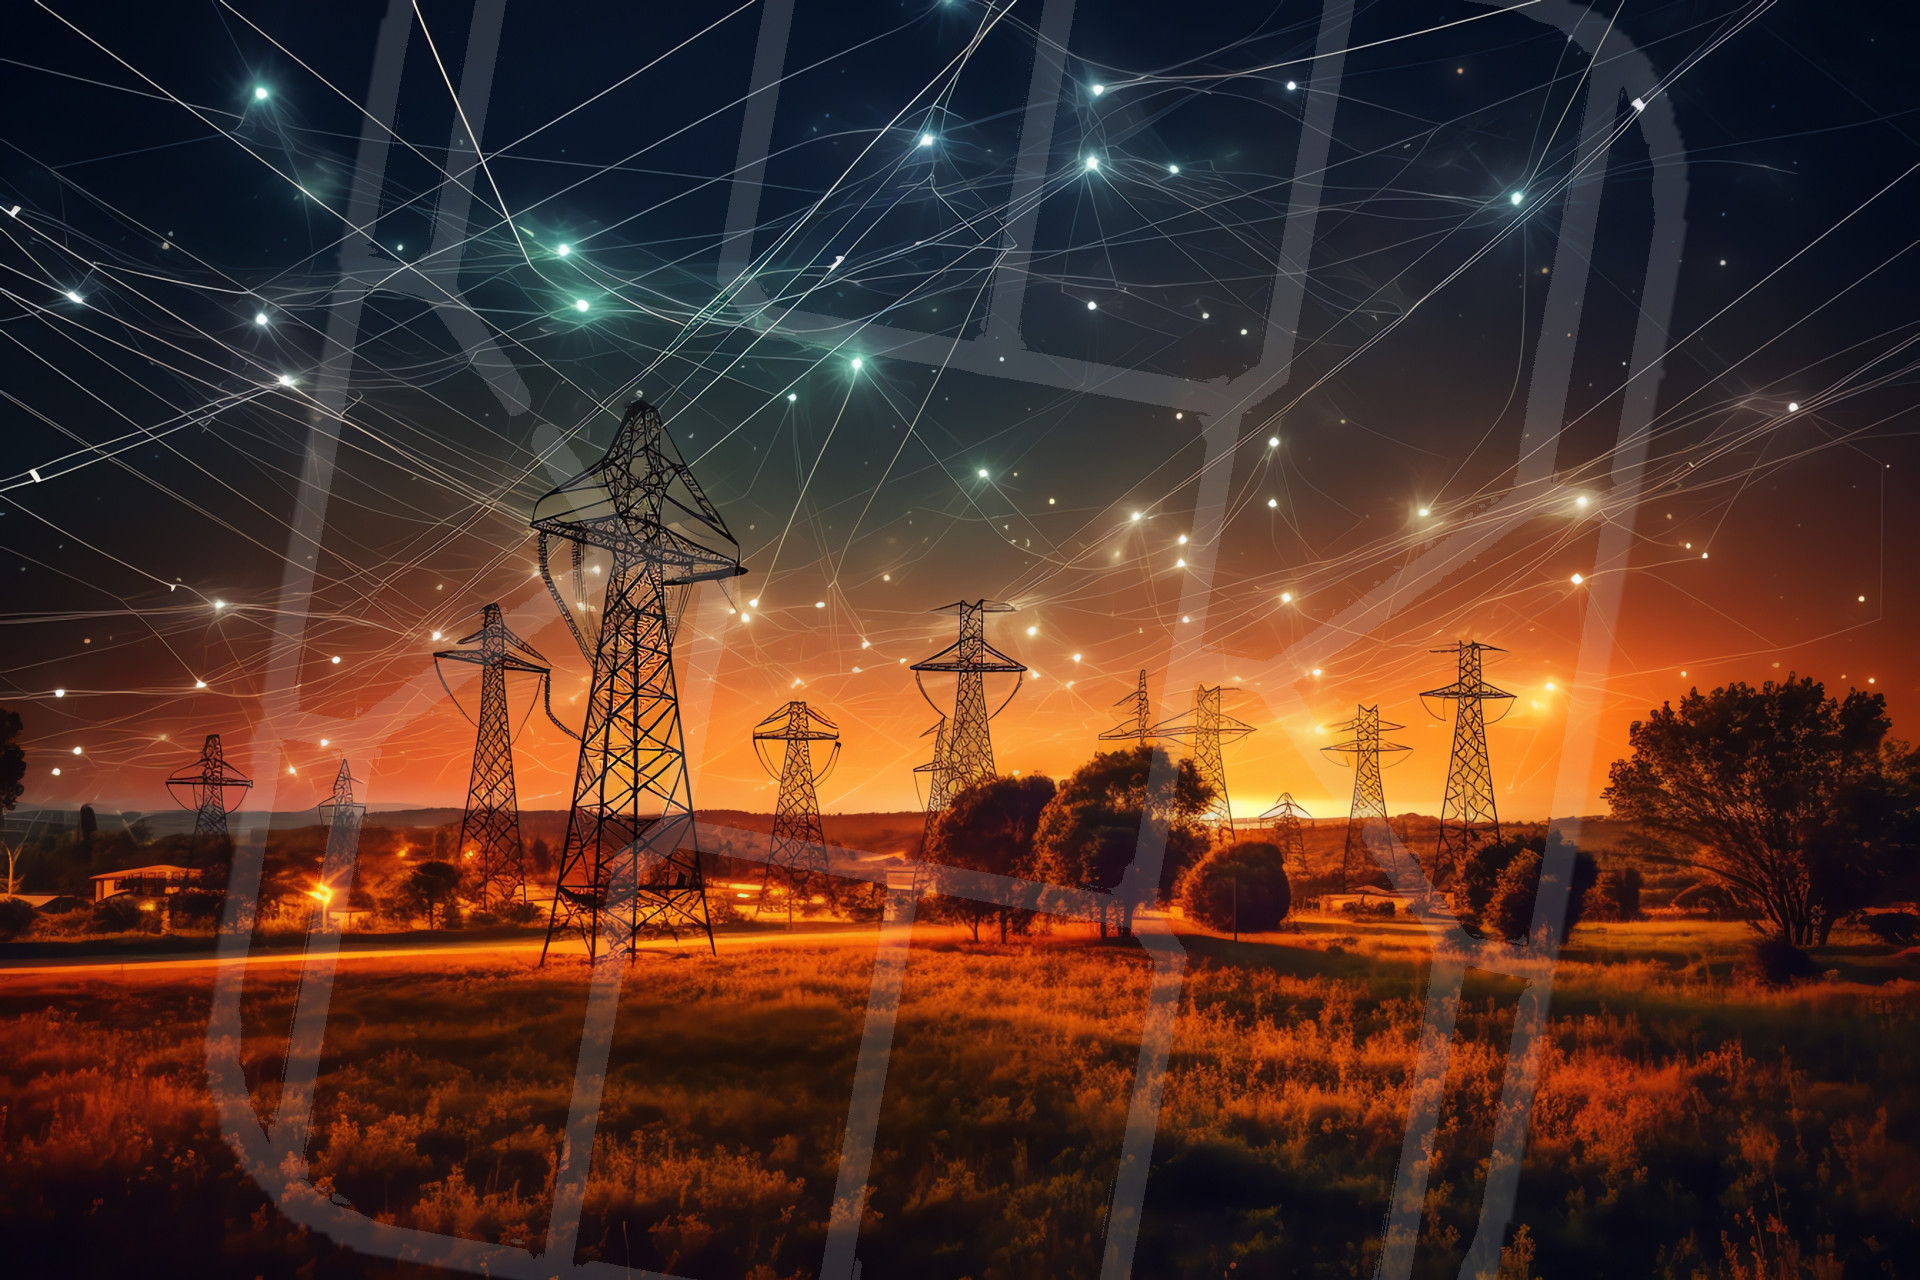 Cellular has changed' – eSIM positions cellular IoT for energy transition